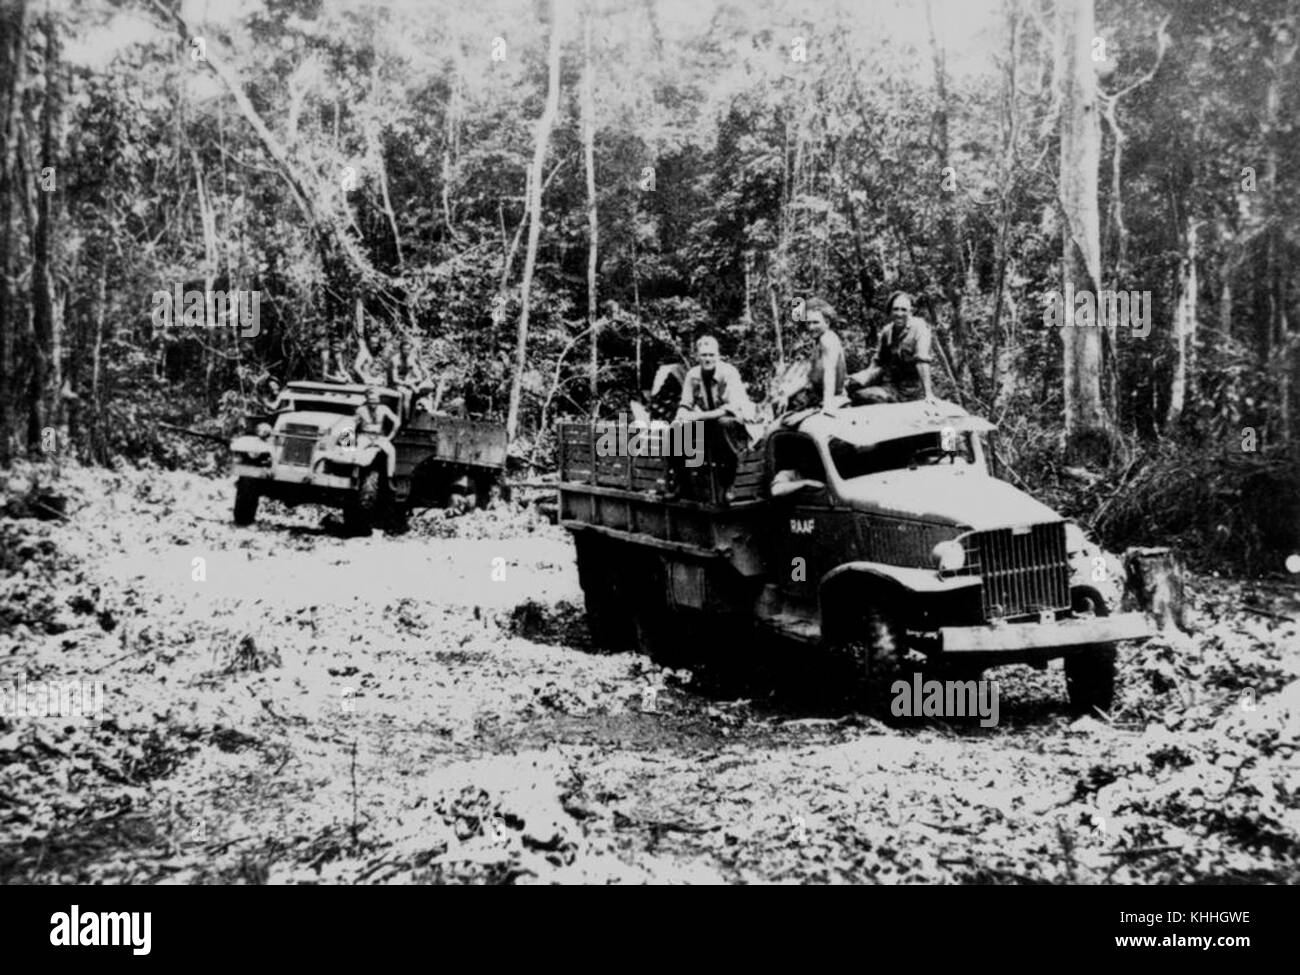 1 196047 Army trucks on patrol in the jungles of New Guinea during World War II, ca. 1944 Stock Photo